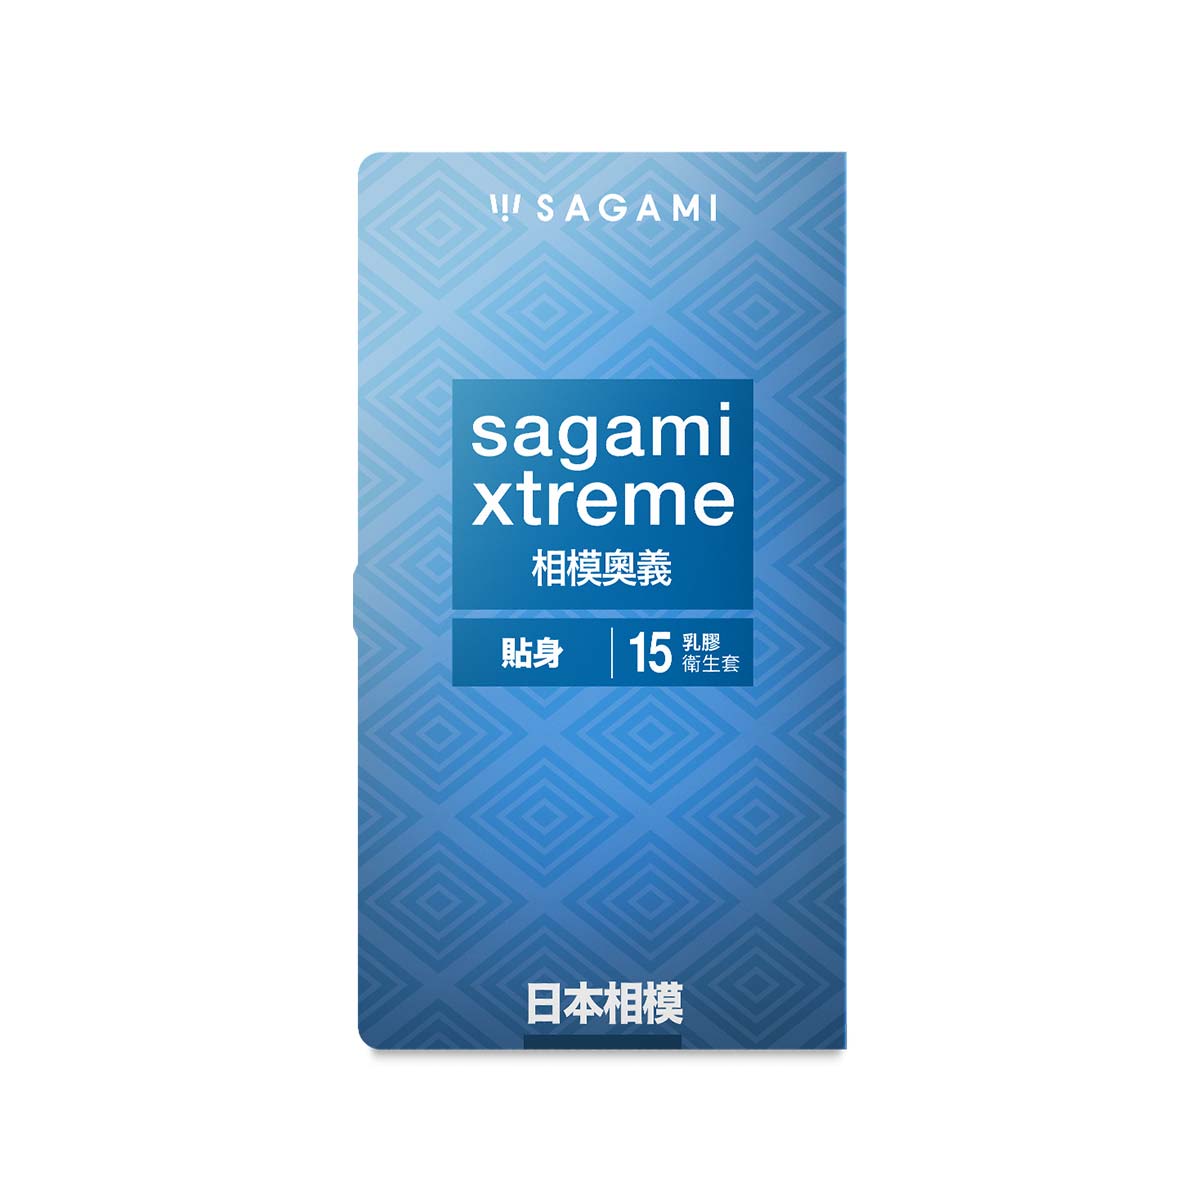 Sagami Xtreme Feel Fit 15s